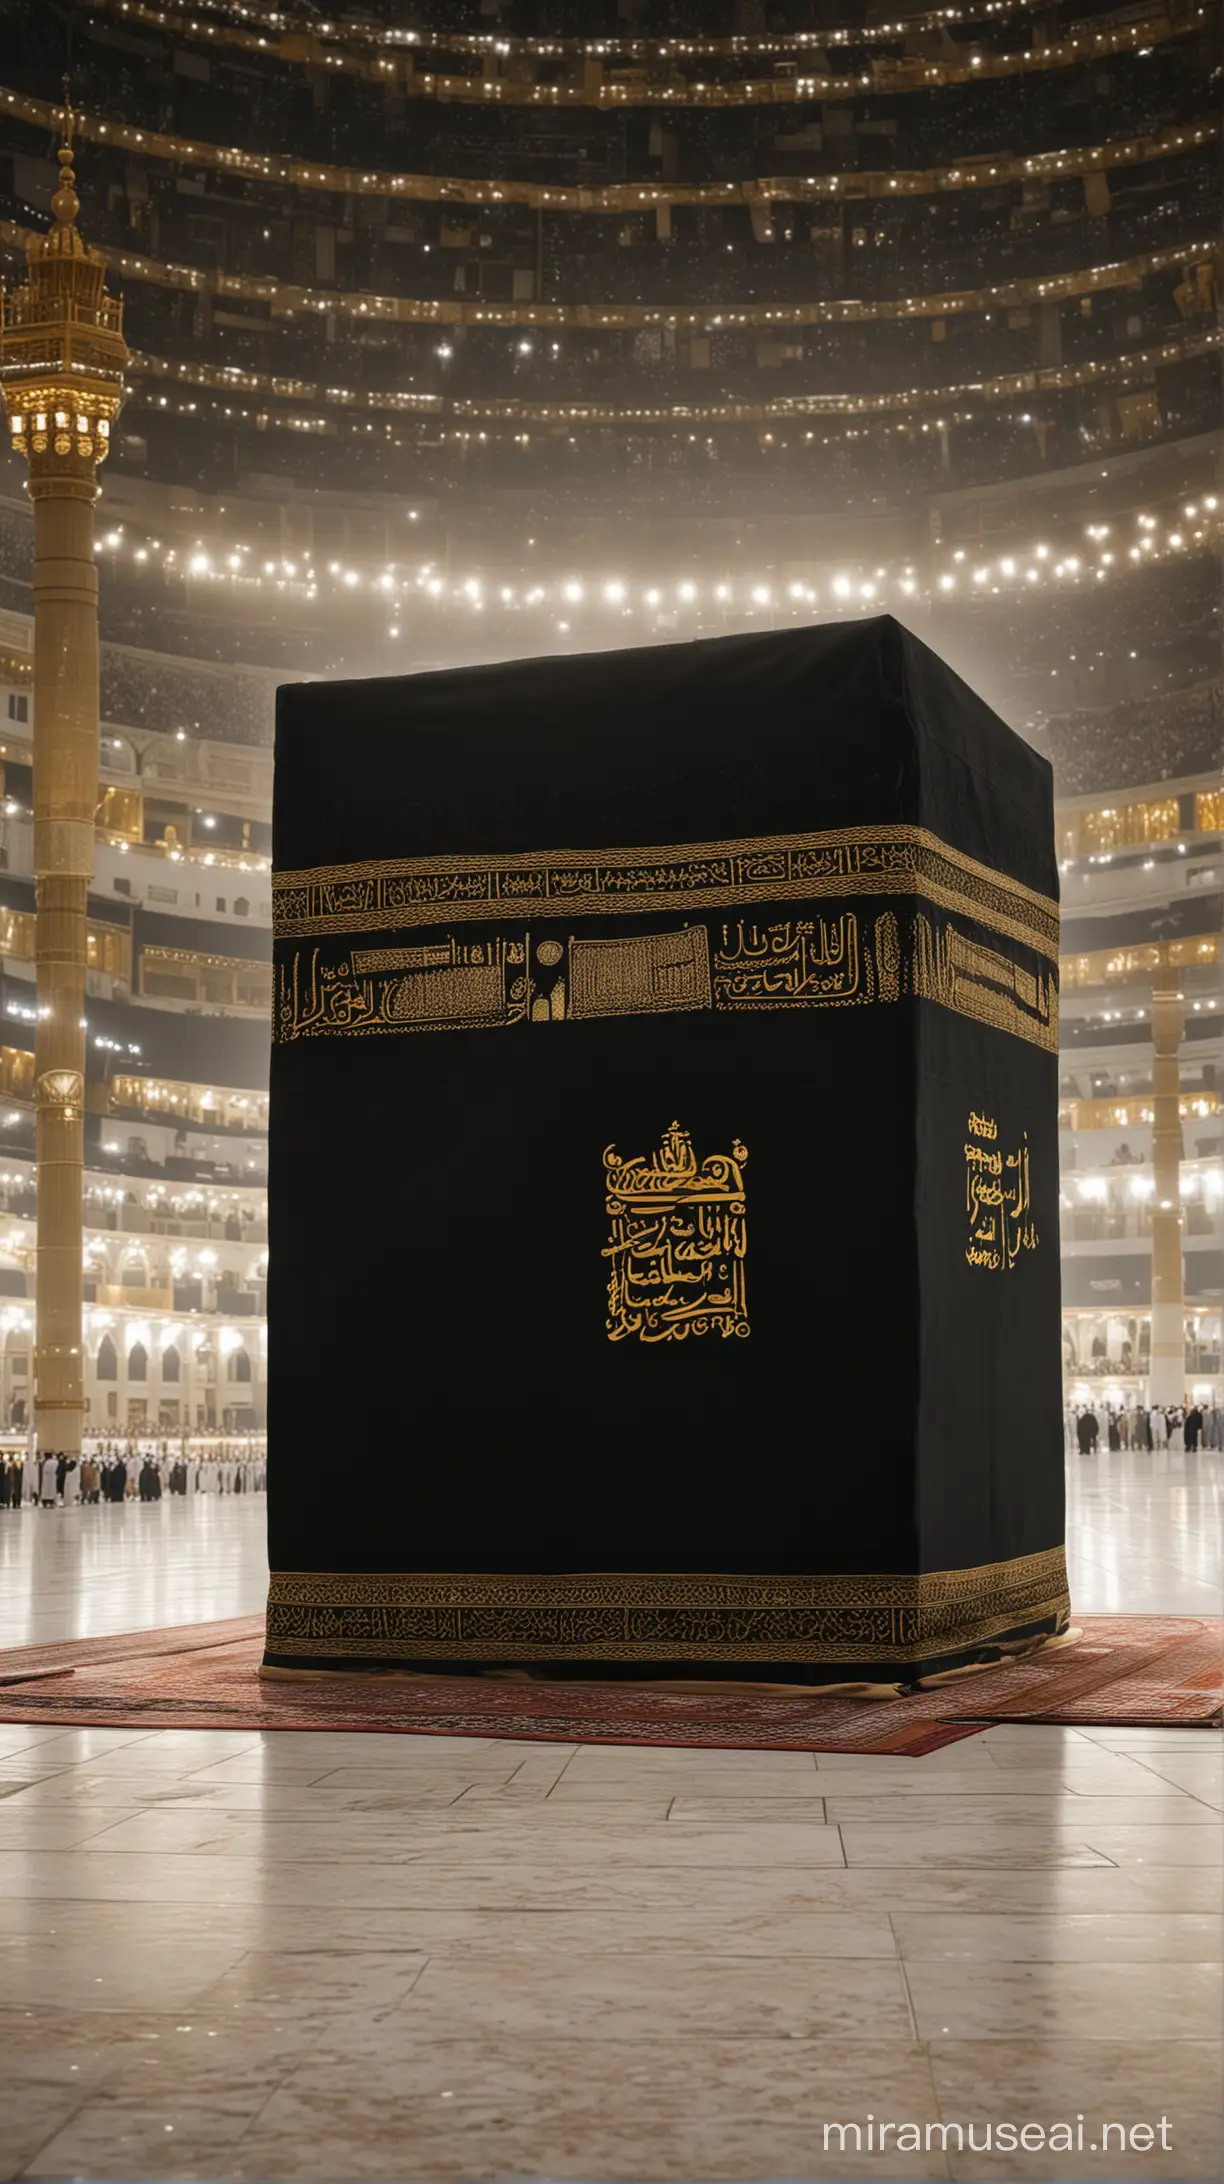 Stunning Realistic Photo of the Kaaba in Mecca